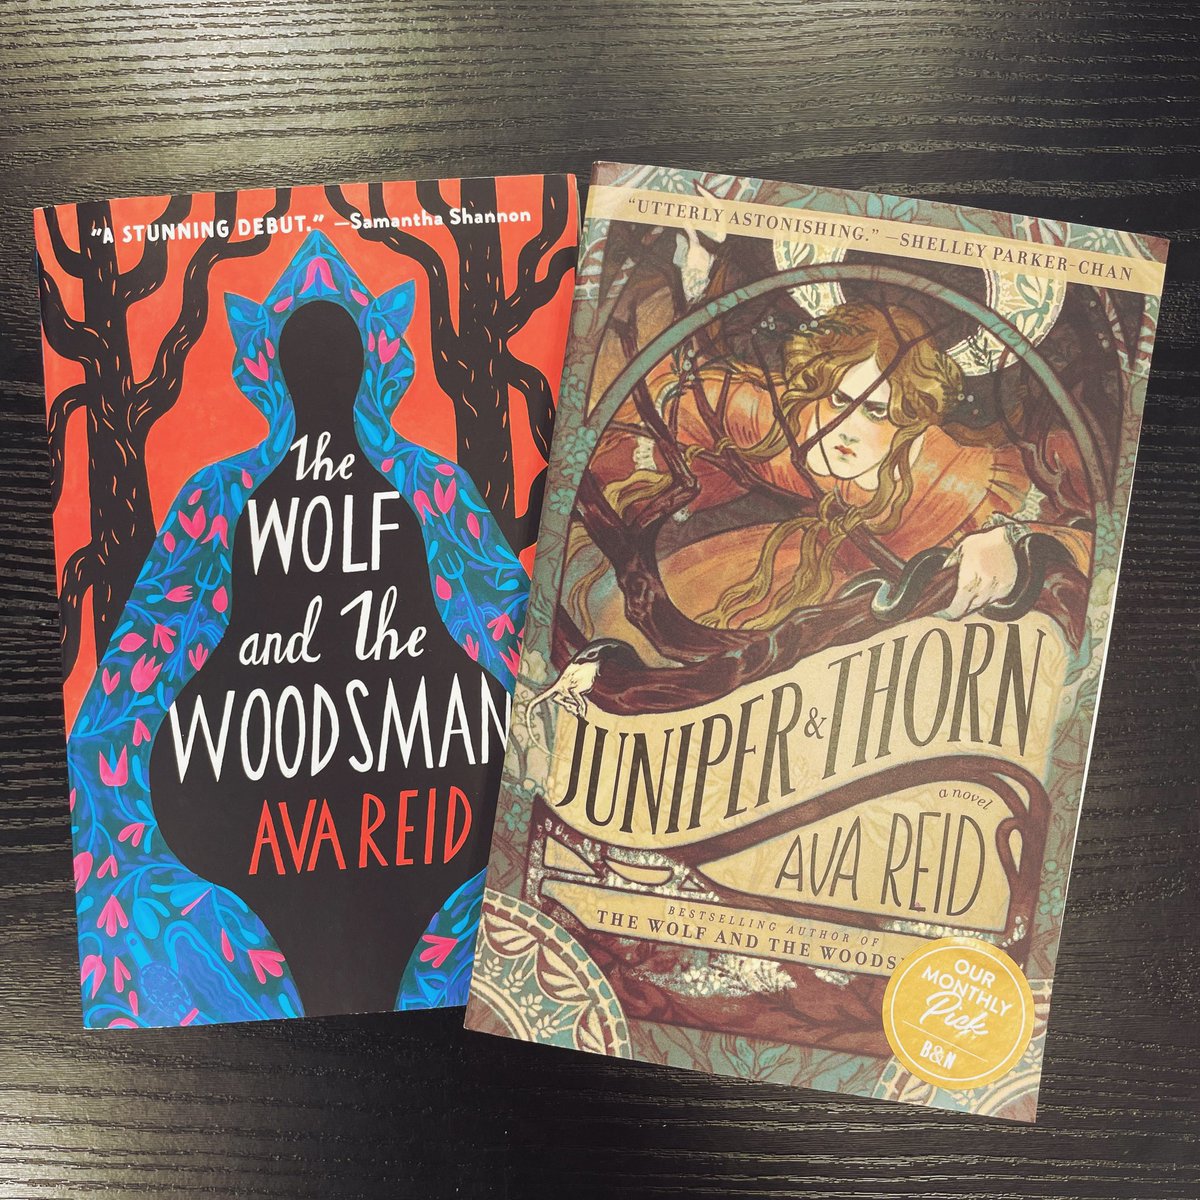 Our May Speculative Fiction pick is from the author of the booktok favorite, Wolf and the Woodsman. This time join Ava Reid in a gothic retelling of The Juniper Tree.

#BNBuzz #BNTheKnow #iloveit #bnbirkdale #BNMagic #BNBookFun #yeahTHATbn #ourbn #BNMonthlyPicks #FantasyFriday